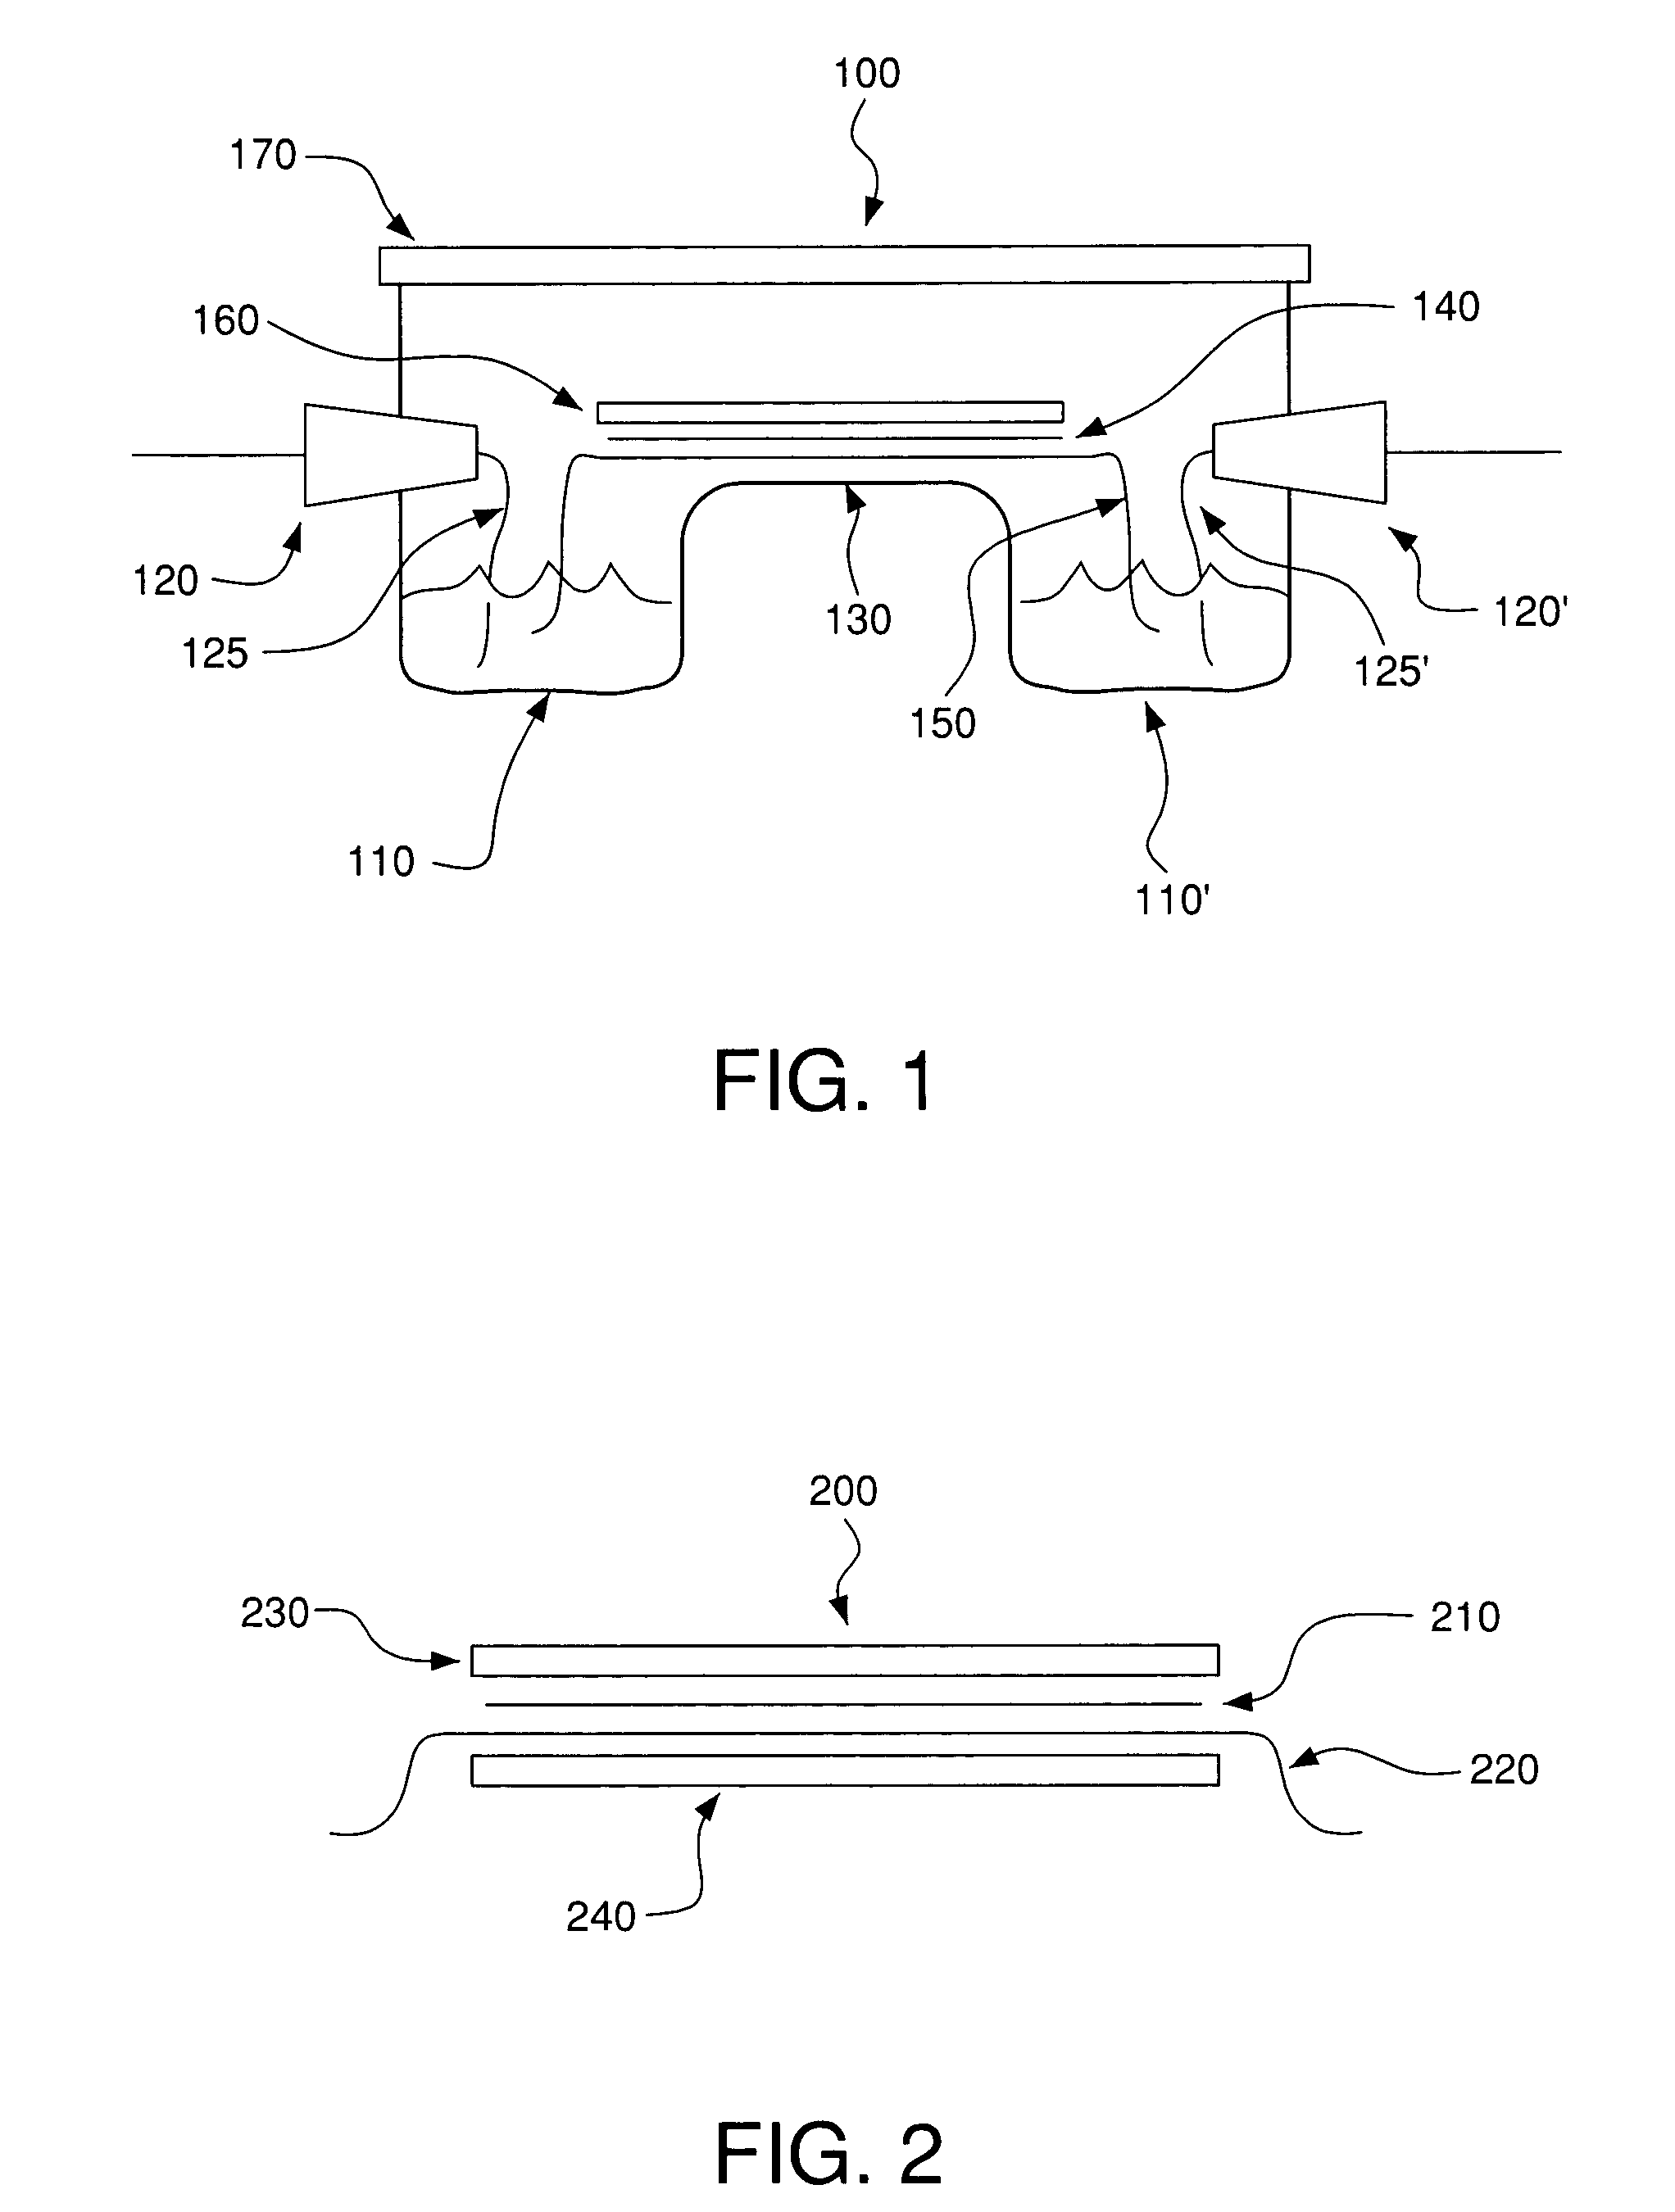 System and methods for electrophoretic separation of proteins on protein binding membranes